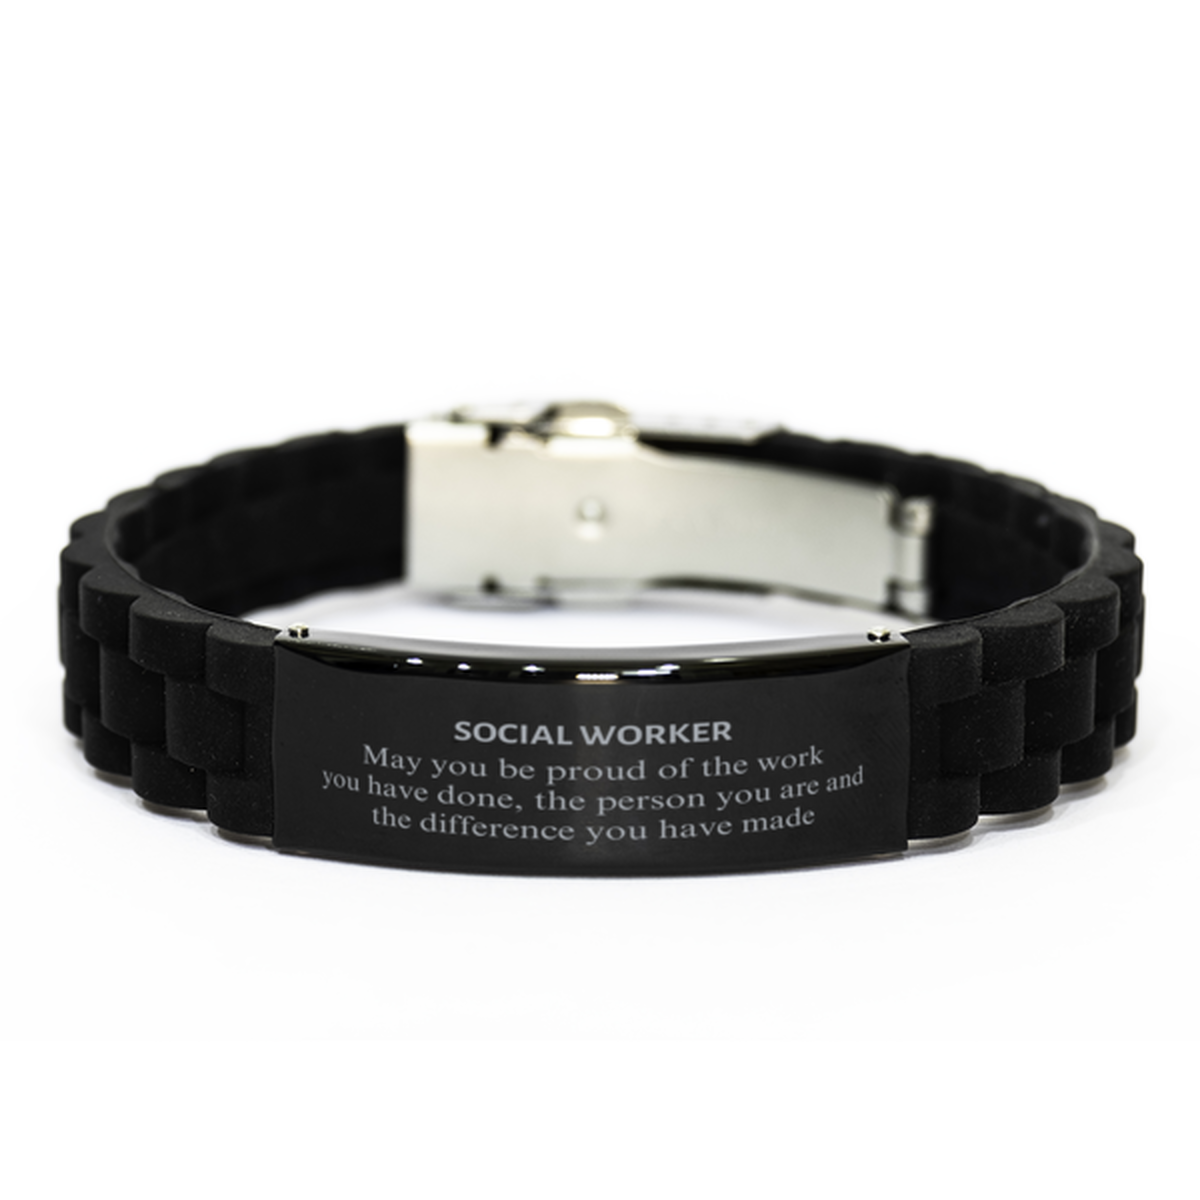 Social Worker May you be proud of the work you have done, Retirement Social Worker Black Glidelock Clasp Bracelet for Colleague Appreciation Gifts Amazing for Social Worker